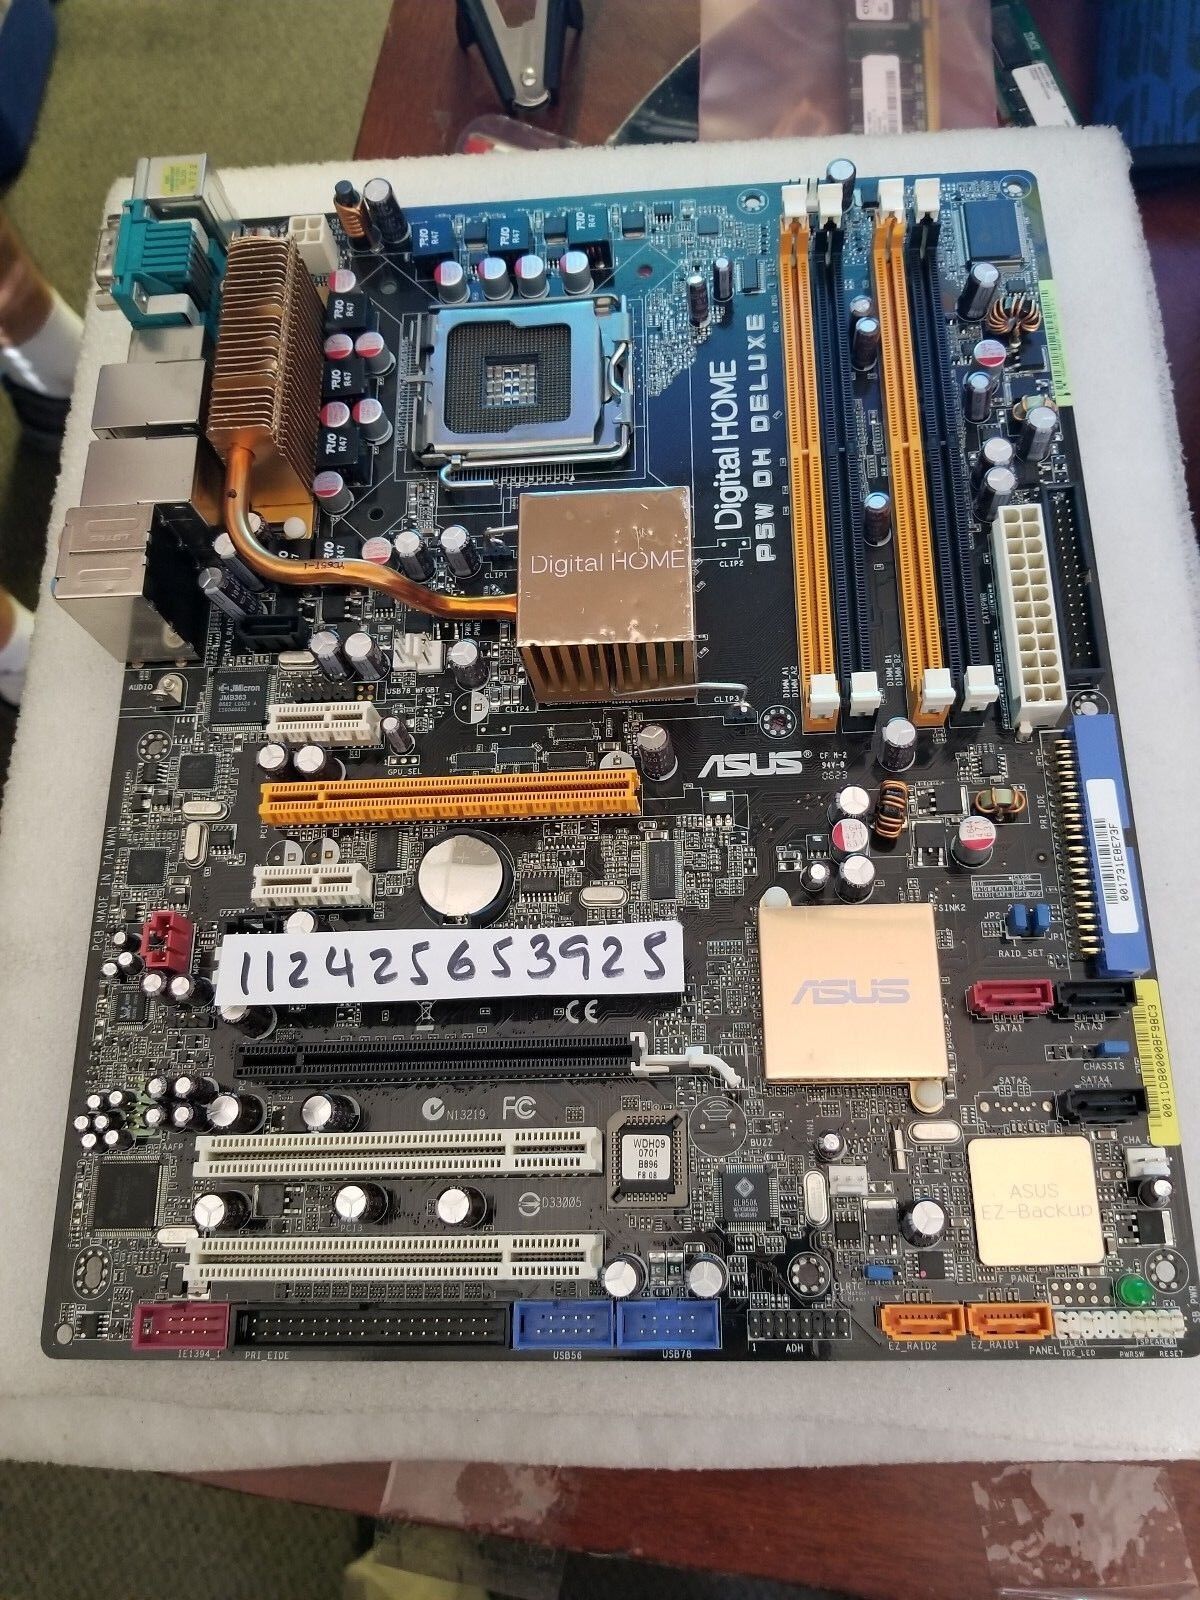 ASUS P5W DH Deluxe Digital Home Series with Intel 975X/ICH7R ATX Motherboard  